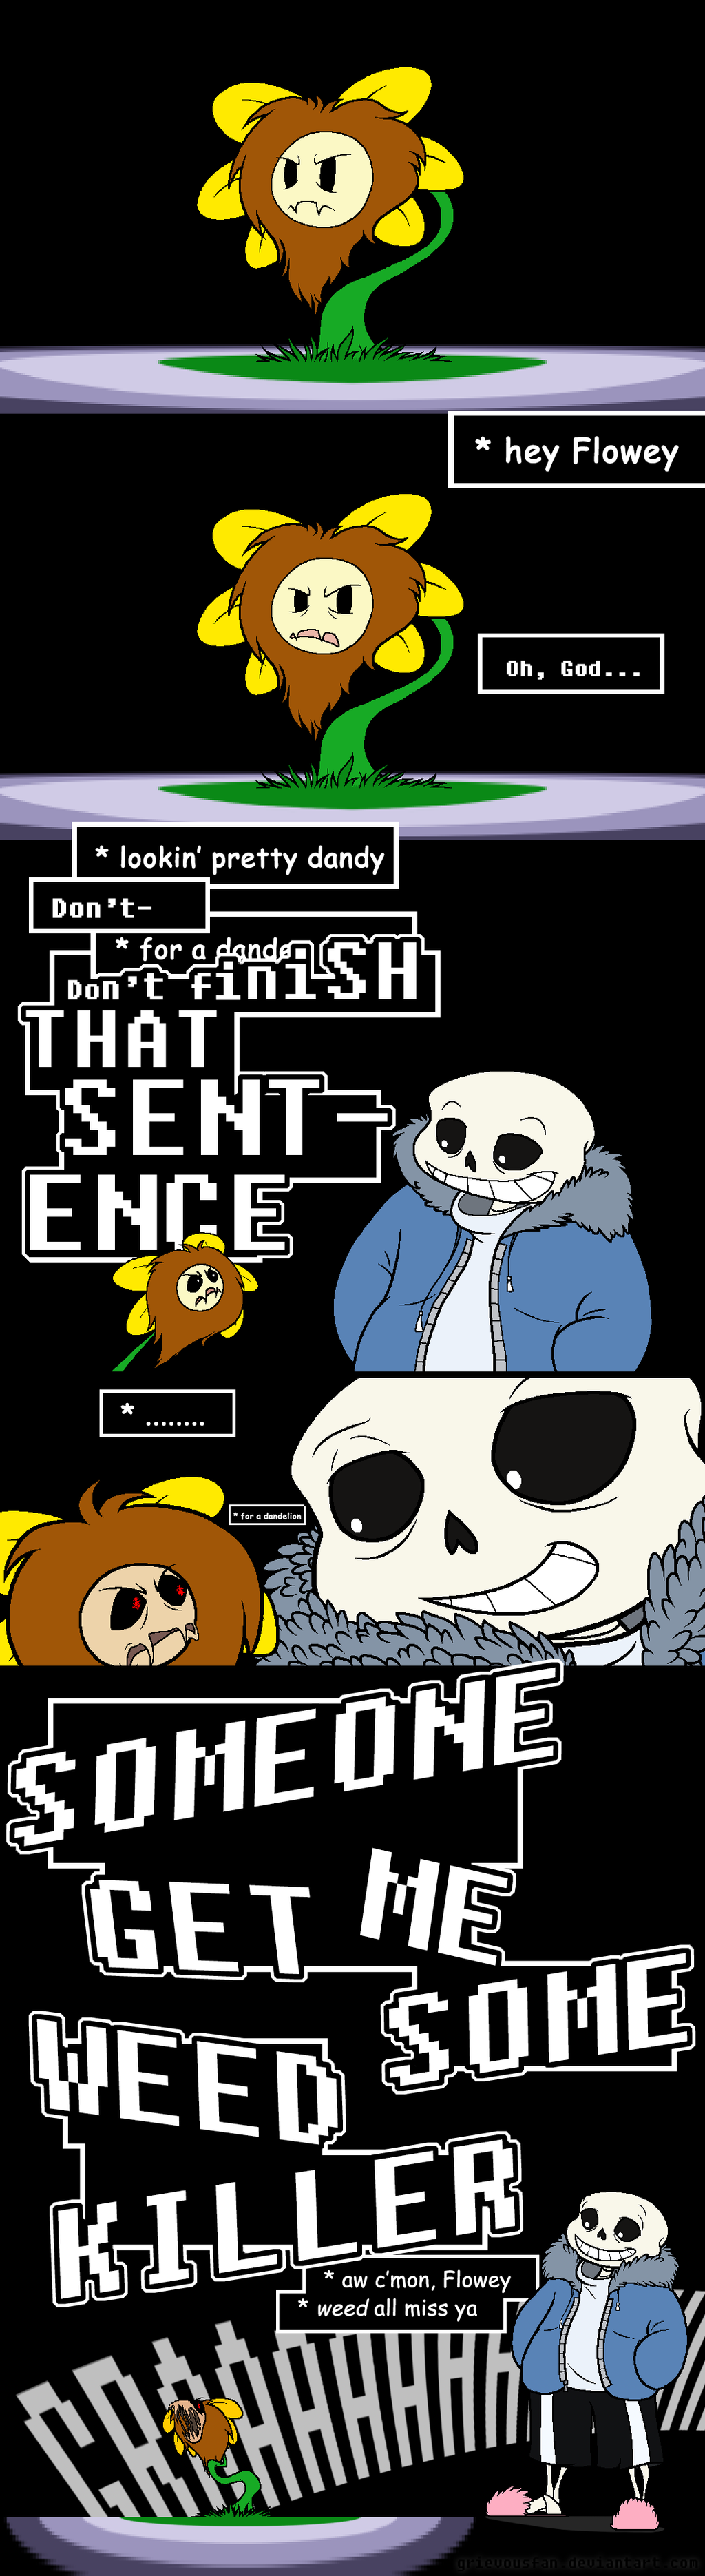 2016 angry animated_skeleton bone clothing comic flora_fauna flower flowey_the_flower grass grievousfan hi_res hoodie humor mane plant pun rage red_eyes sans_(undertale) sharp_teeth skeleton slippers smile spotlight stare teeth text text_box undead undertale video_games yelling